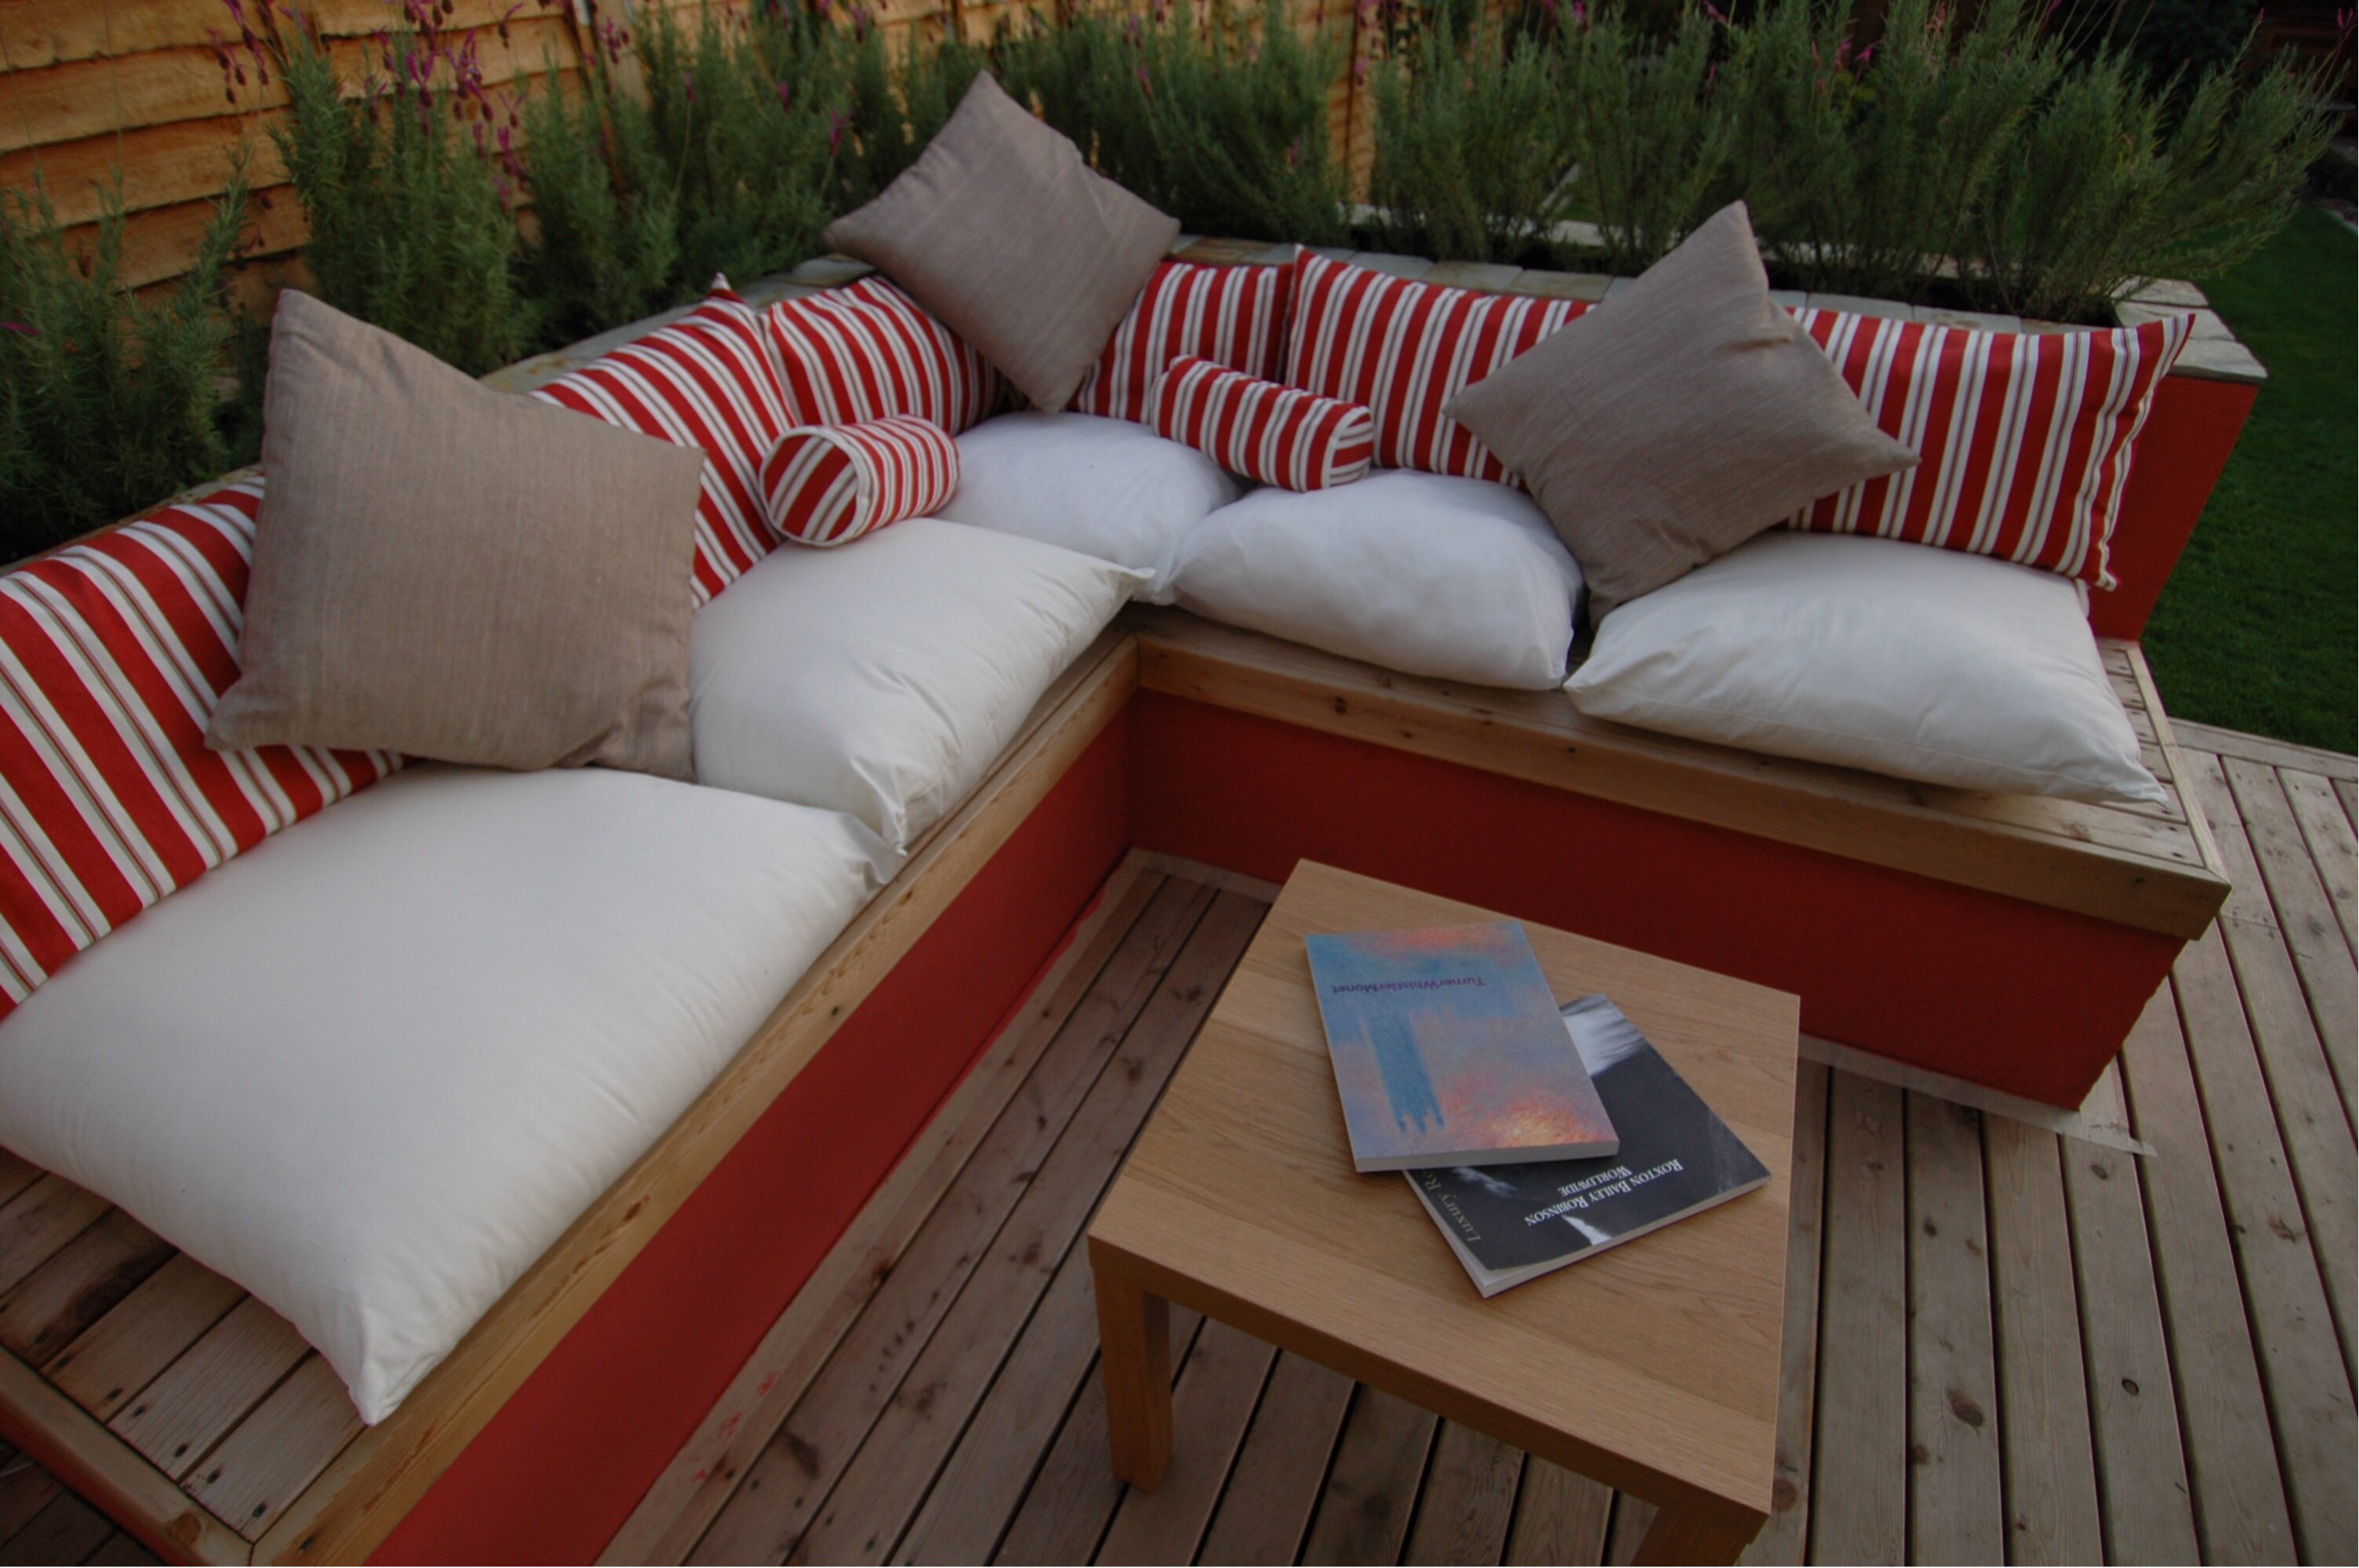 Add furniture to your garden patio design for a softer look